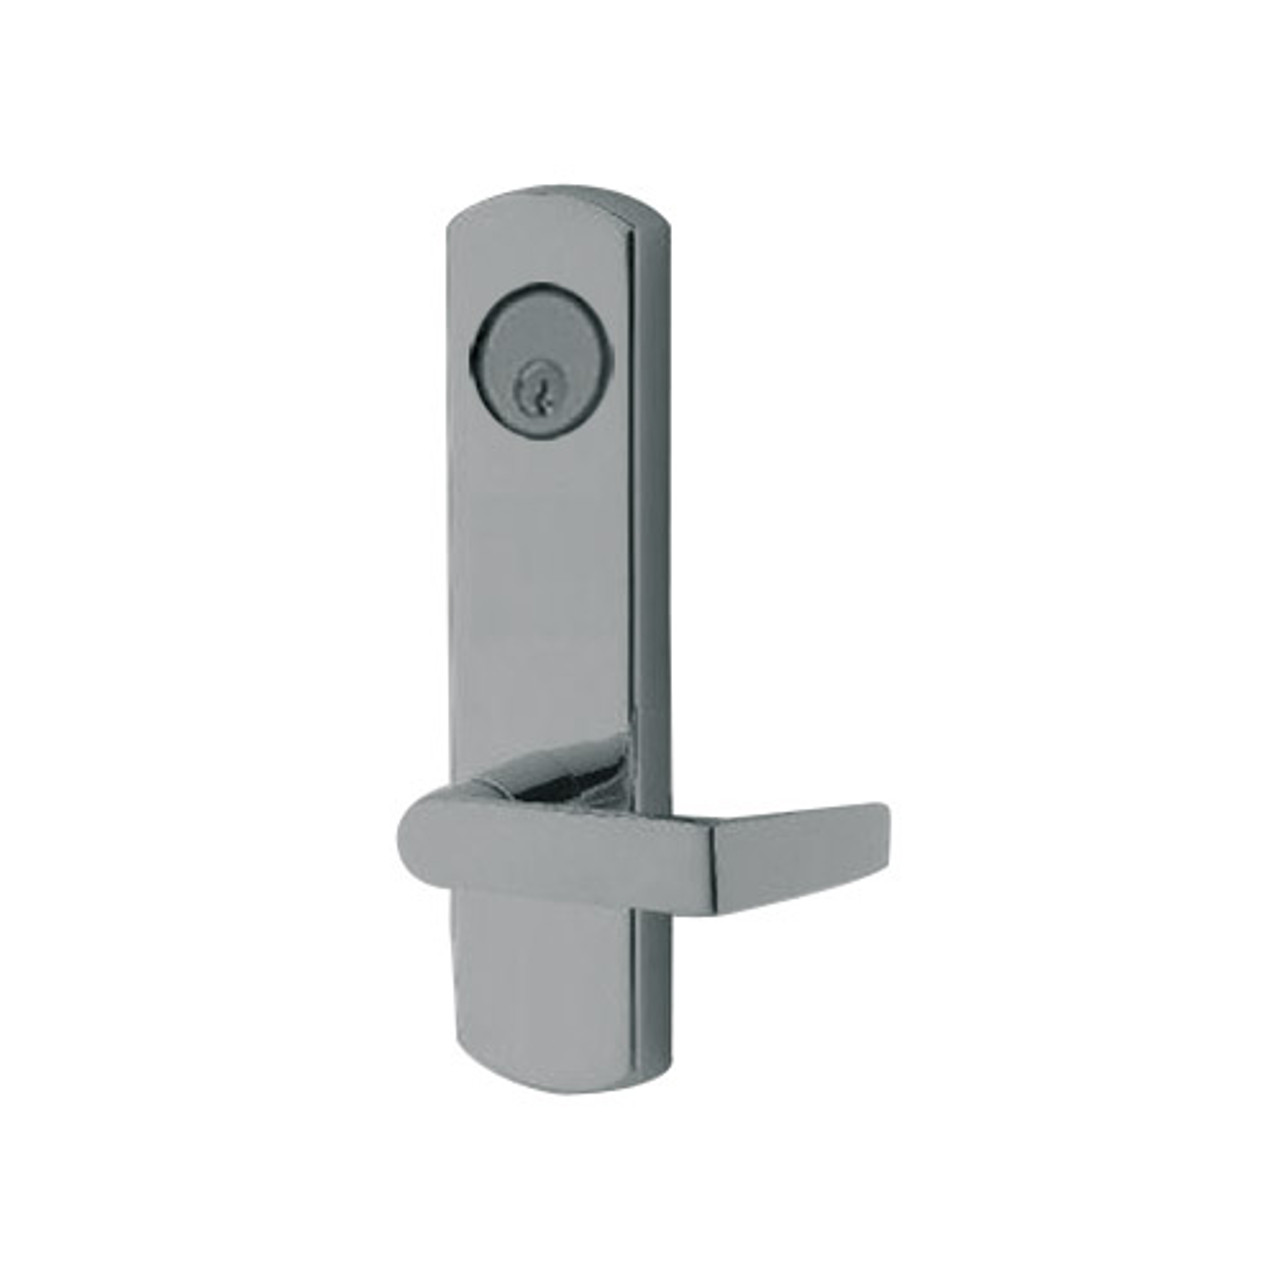 3080E-03-0-91-50 US32D Adams Rite Electrified Entry Trim with Square Lever in Satin Stainless Finish